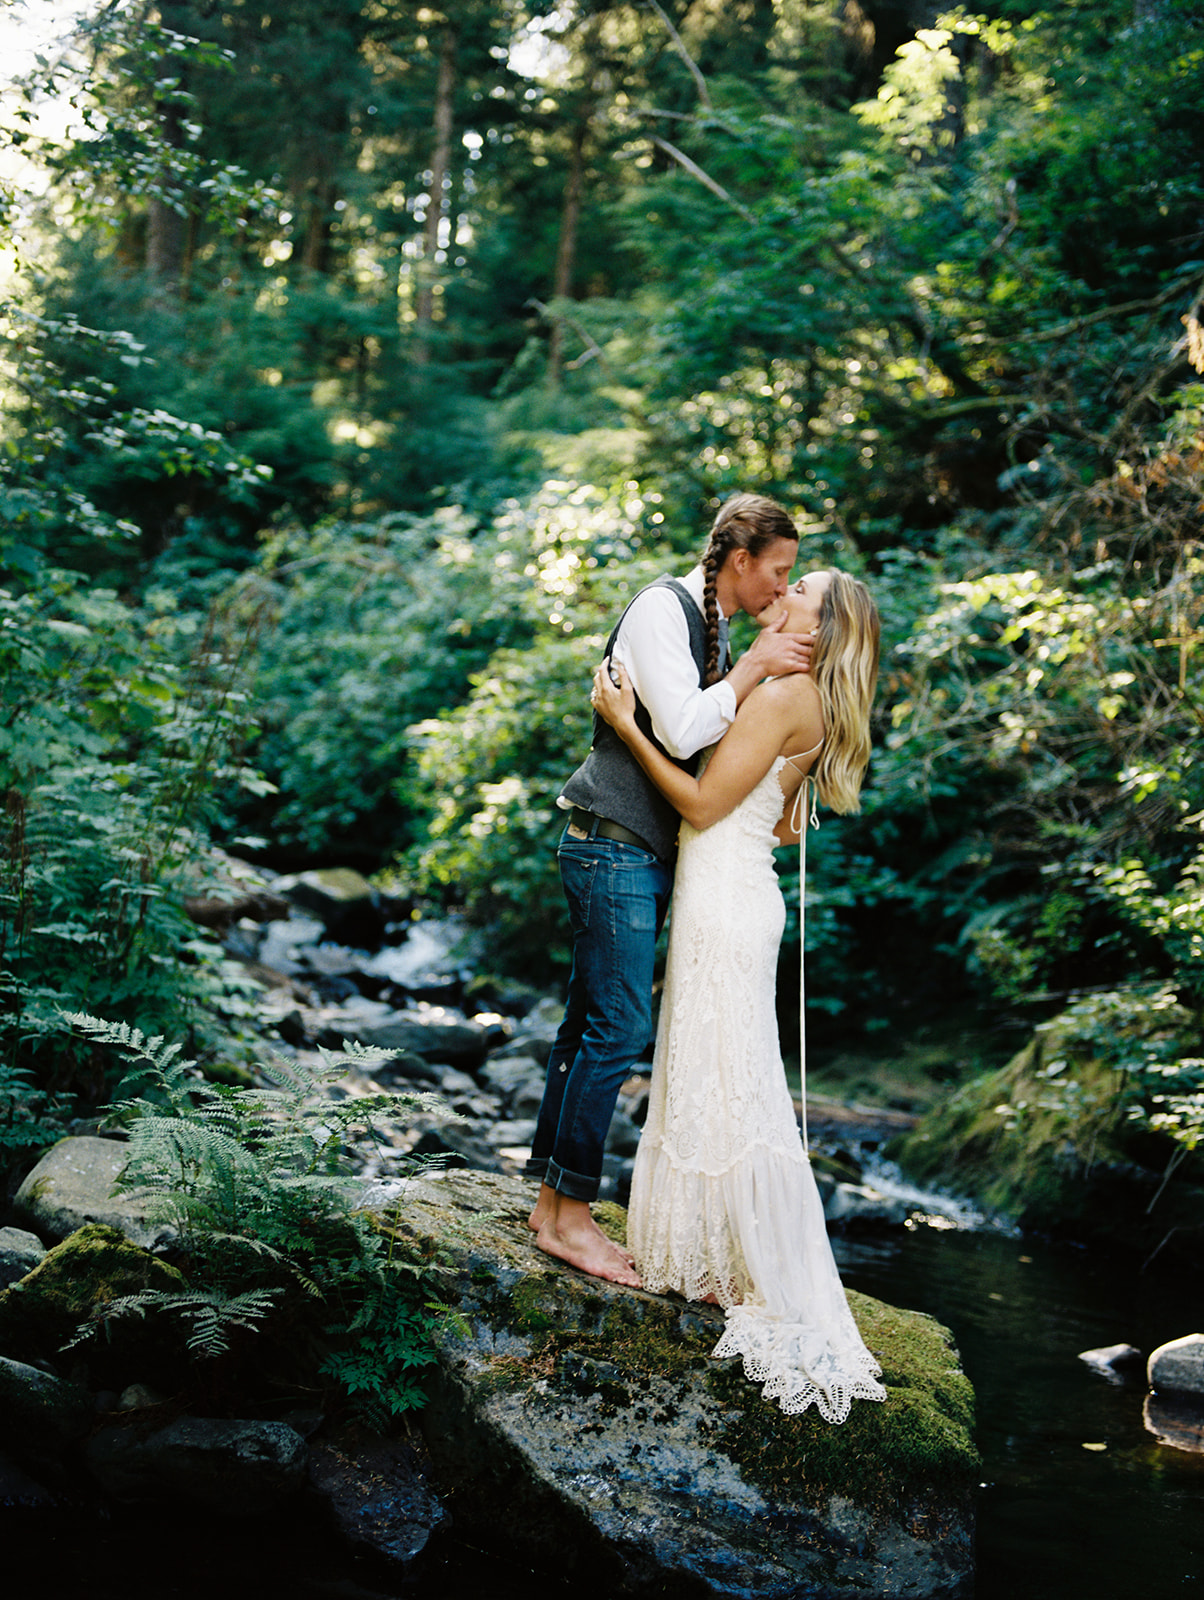 A male, the groom, and a female, the bride, sharing a kiss on top of a grey rock. Behind them is greenery everywhere. There are at the Oregon coast.